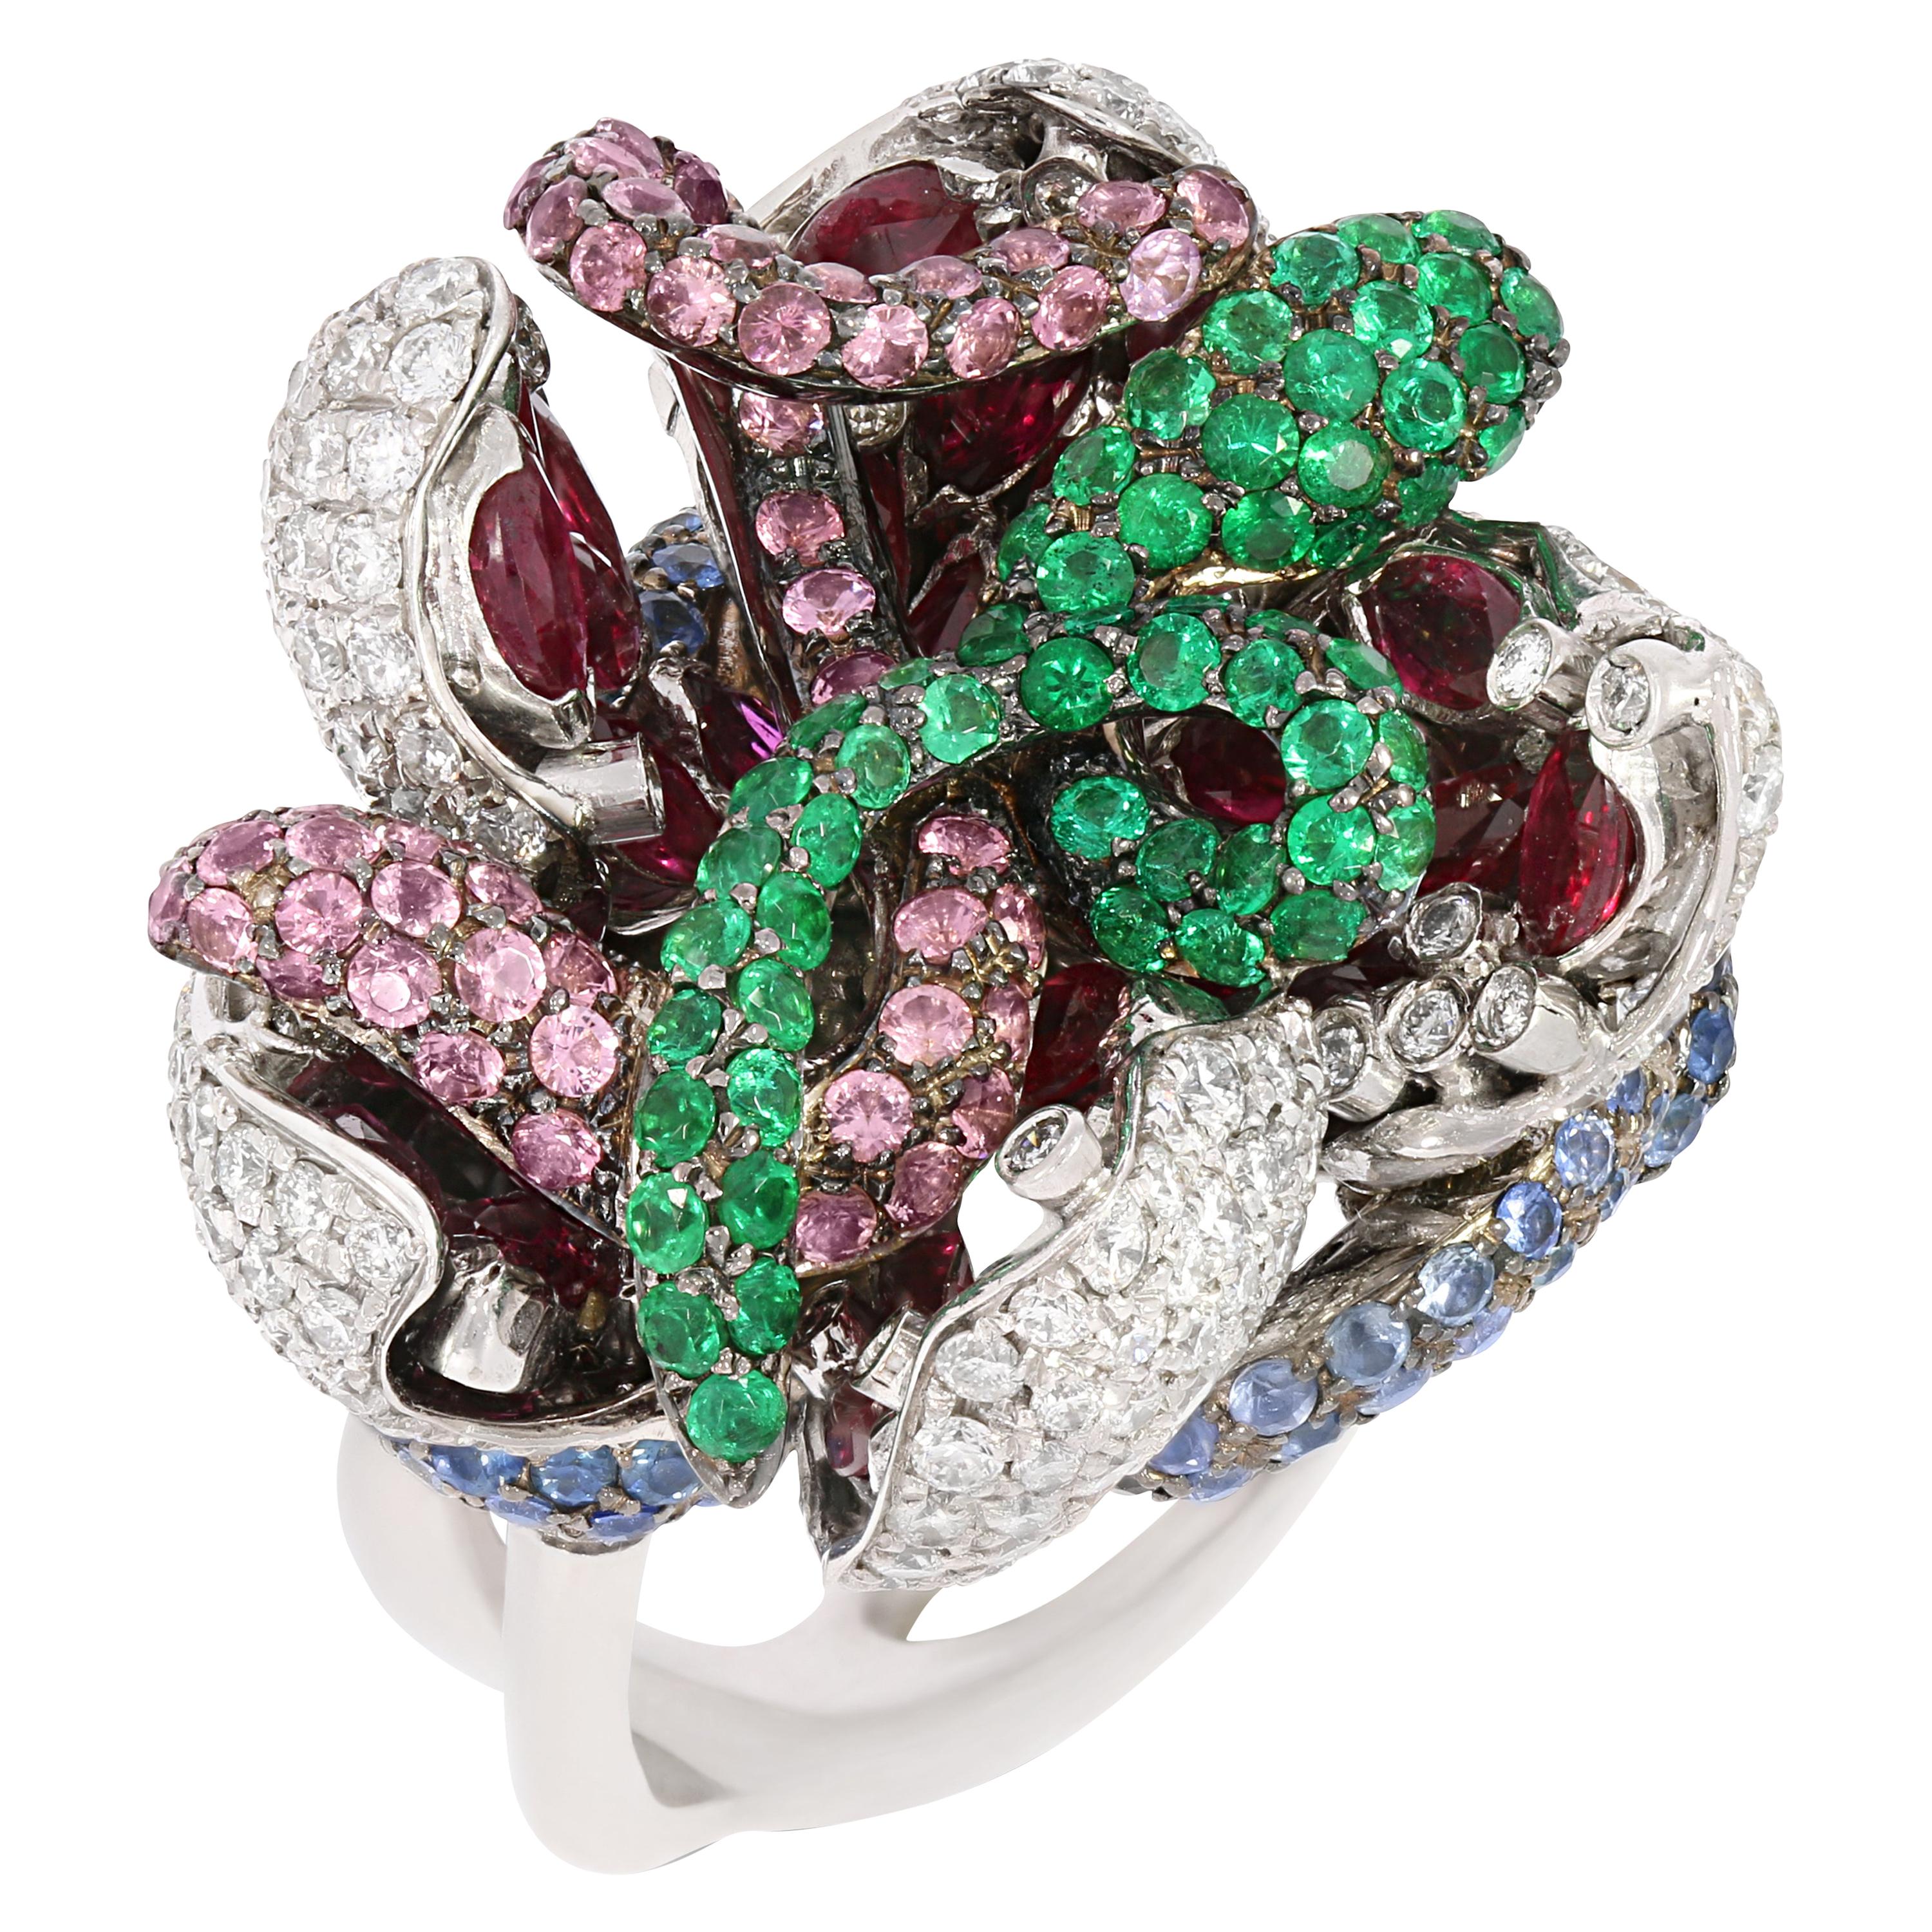 Rosior one-off Diamond, Sapphire, Tourmaline and Emerald Ring set in White Gold For Sale